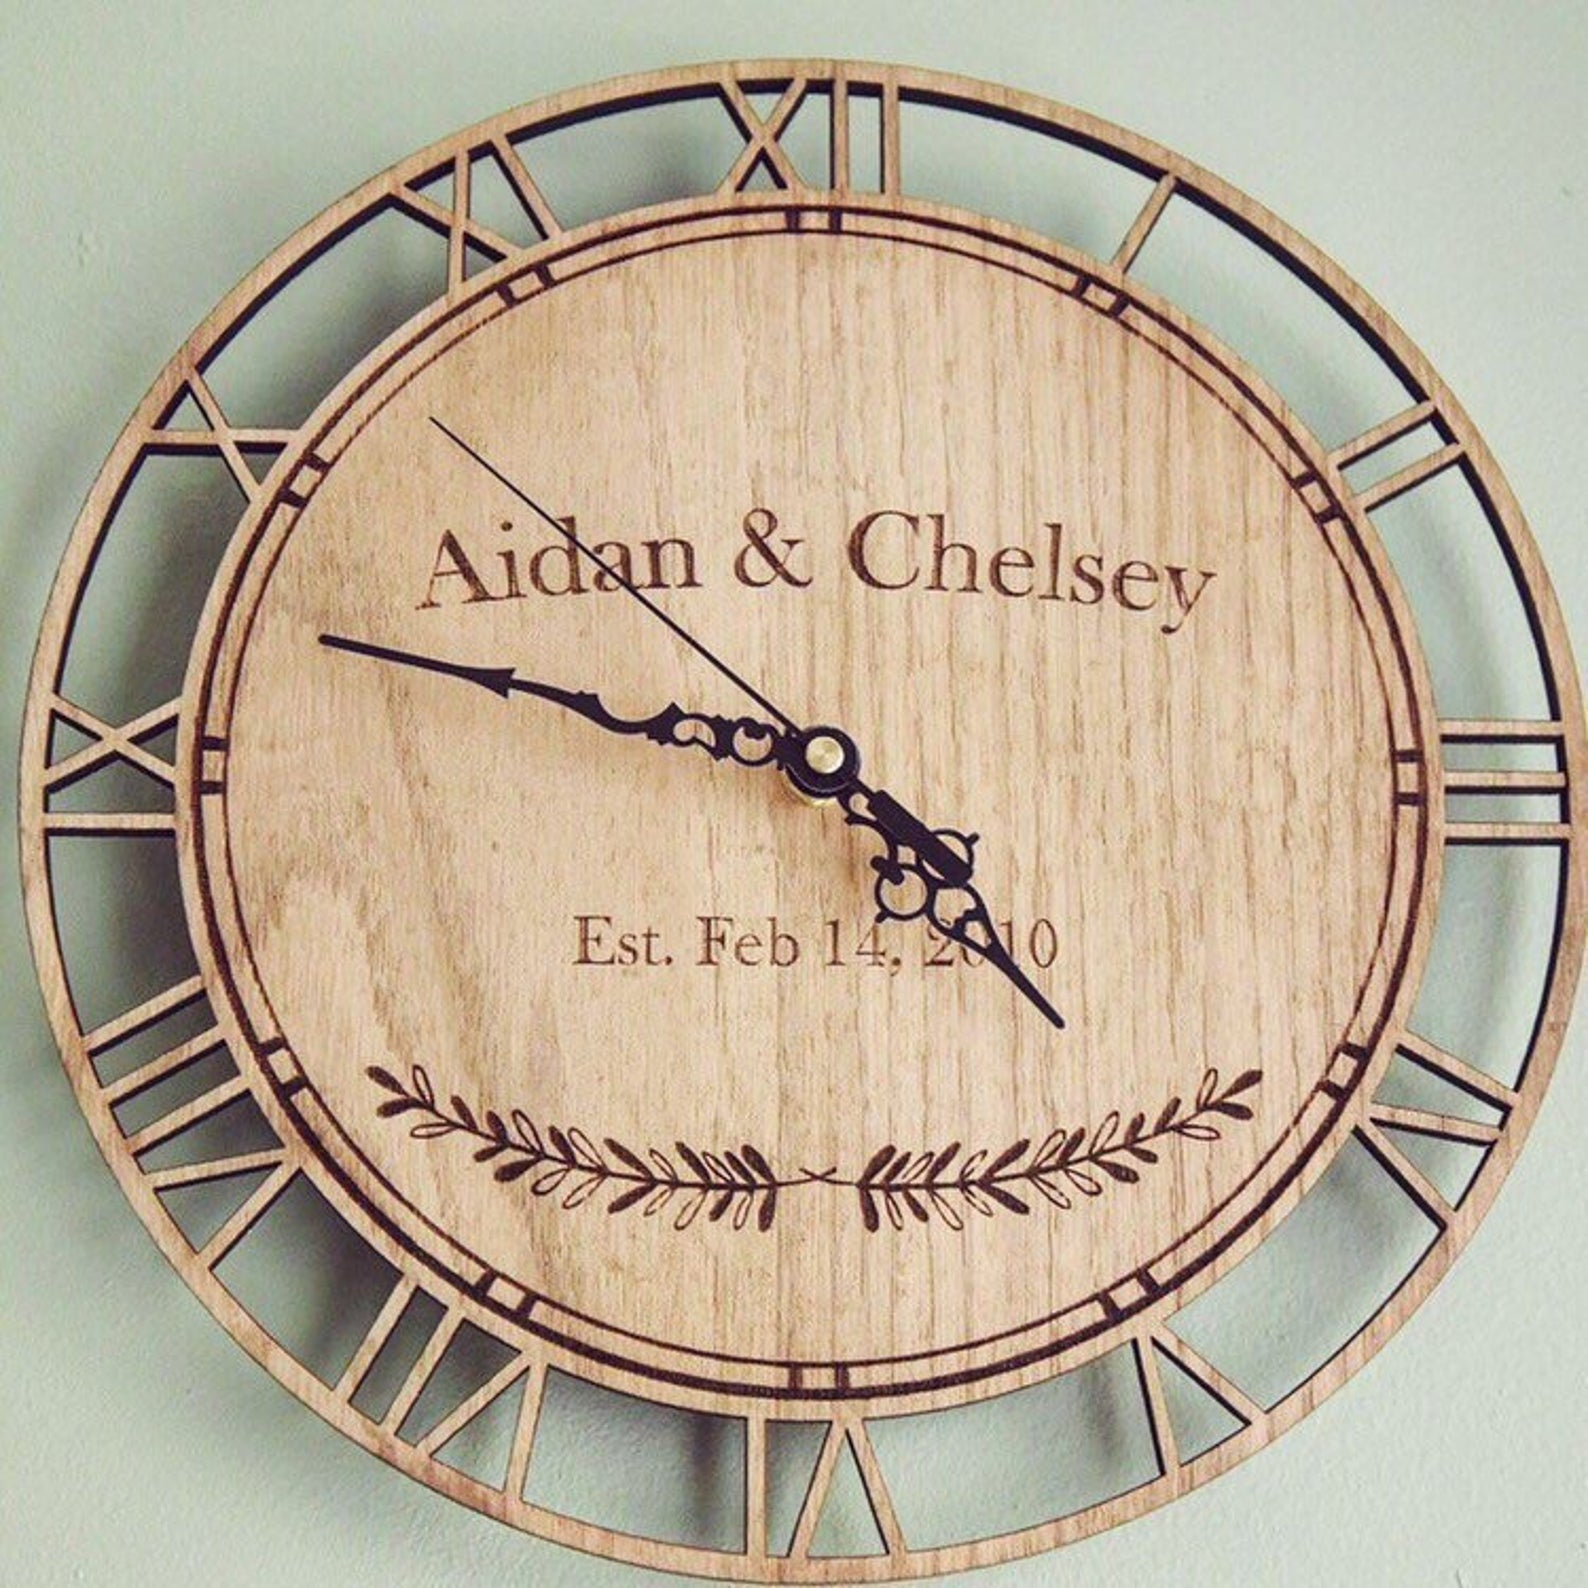 Personalized wooden clock with wedding date on Etsy